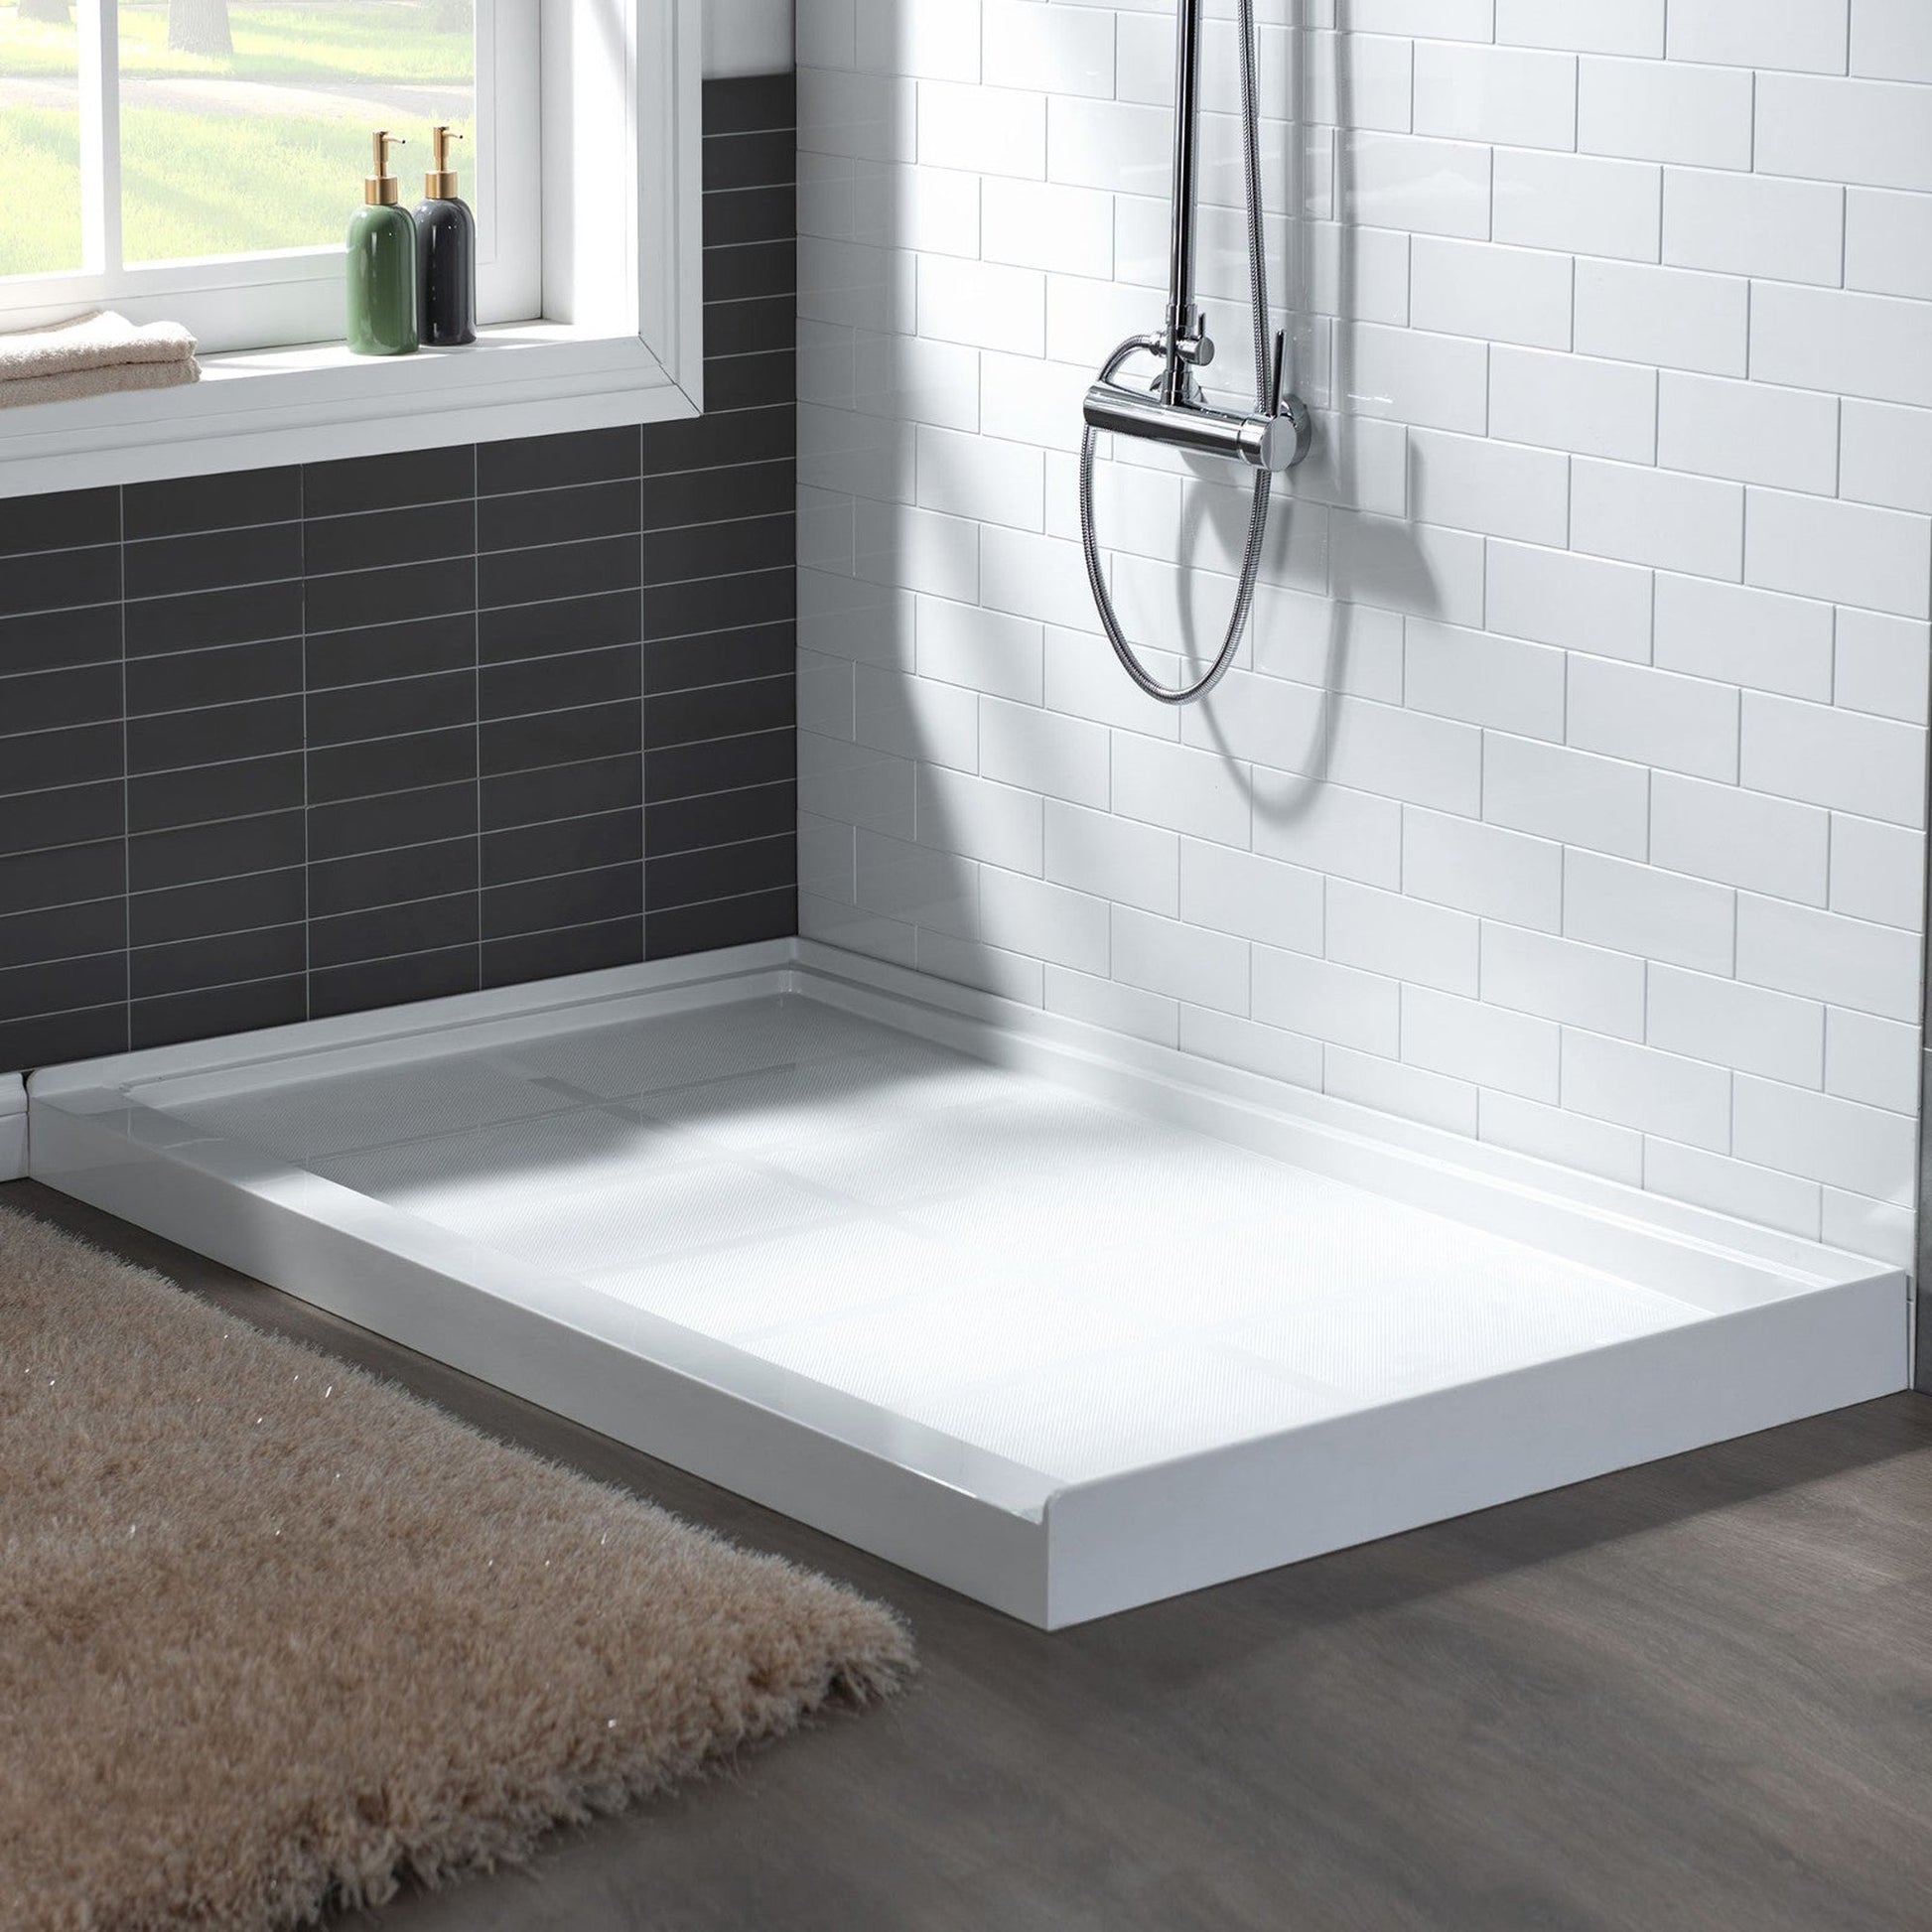 WoodBridge 60" x 36" White Solid Surface Shower Base Right Drain Location With Chrome Trench Drain Cover